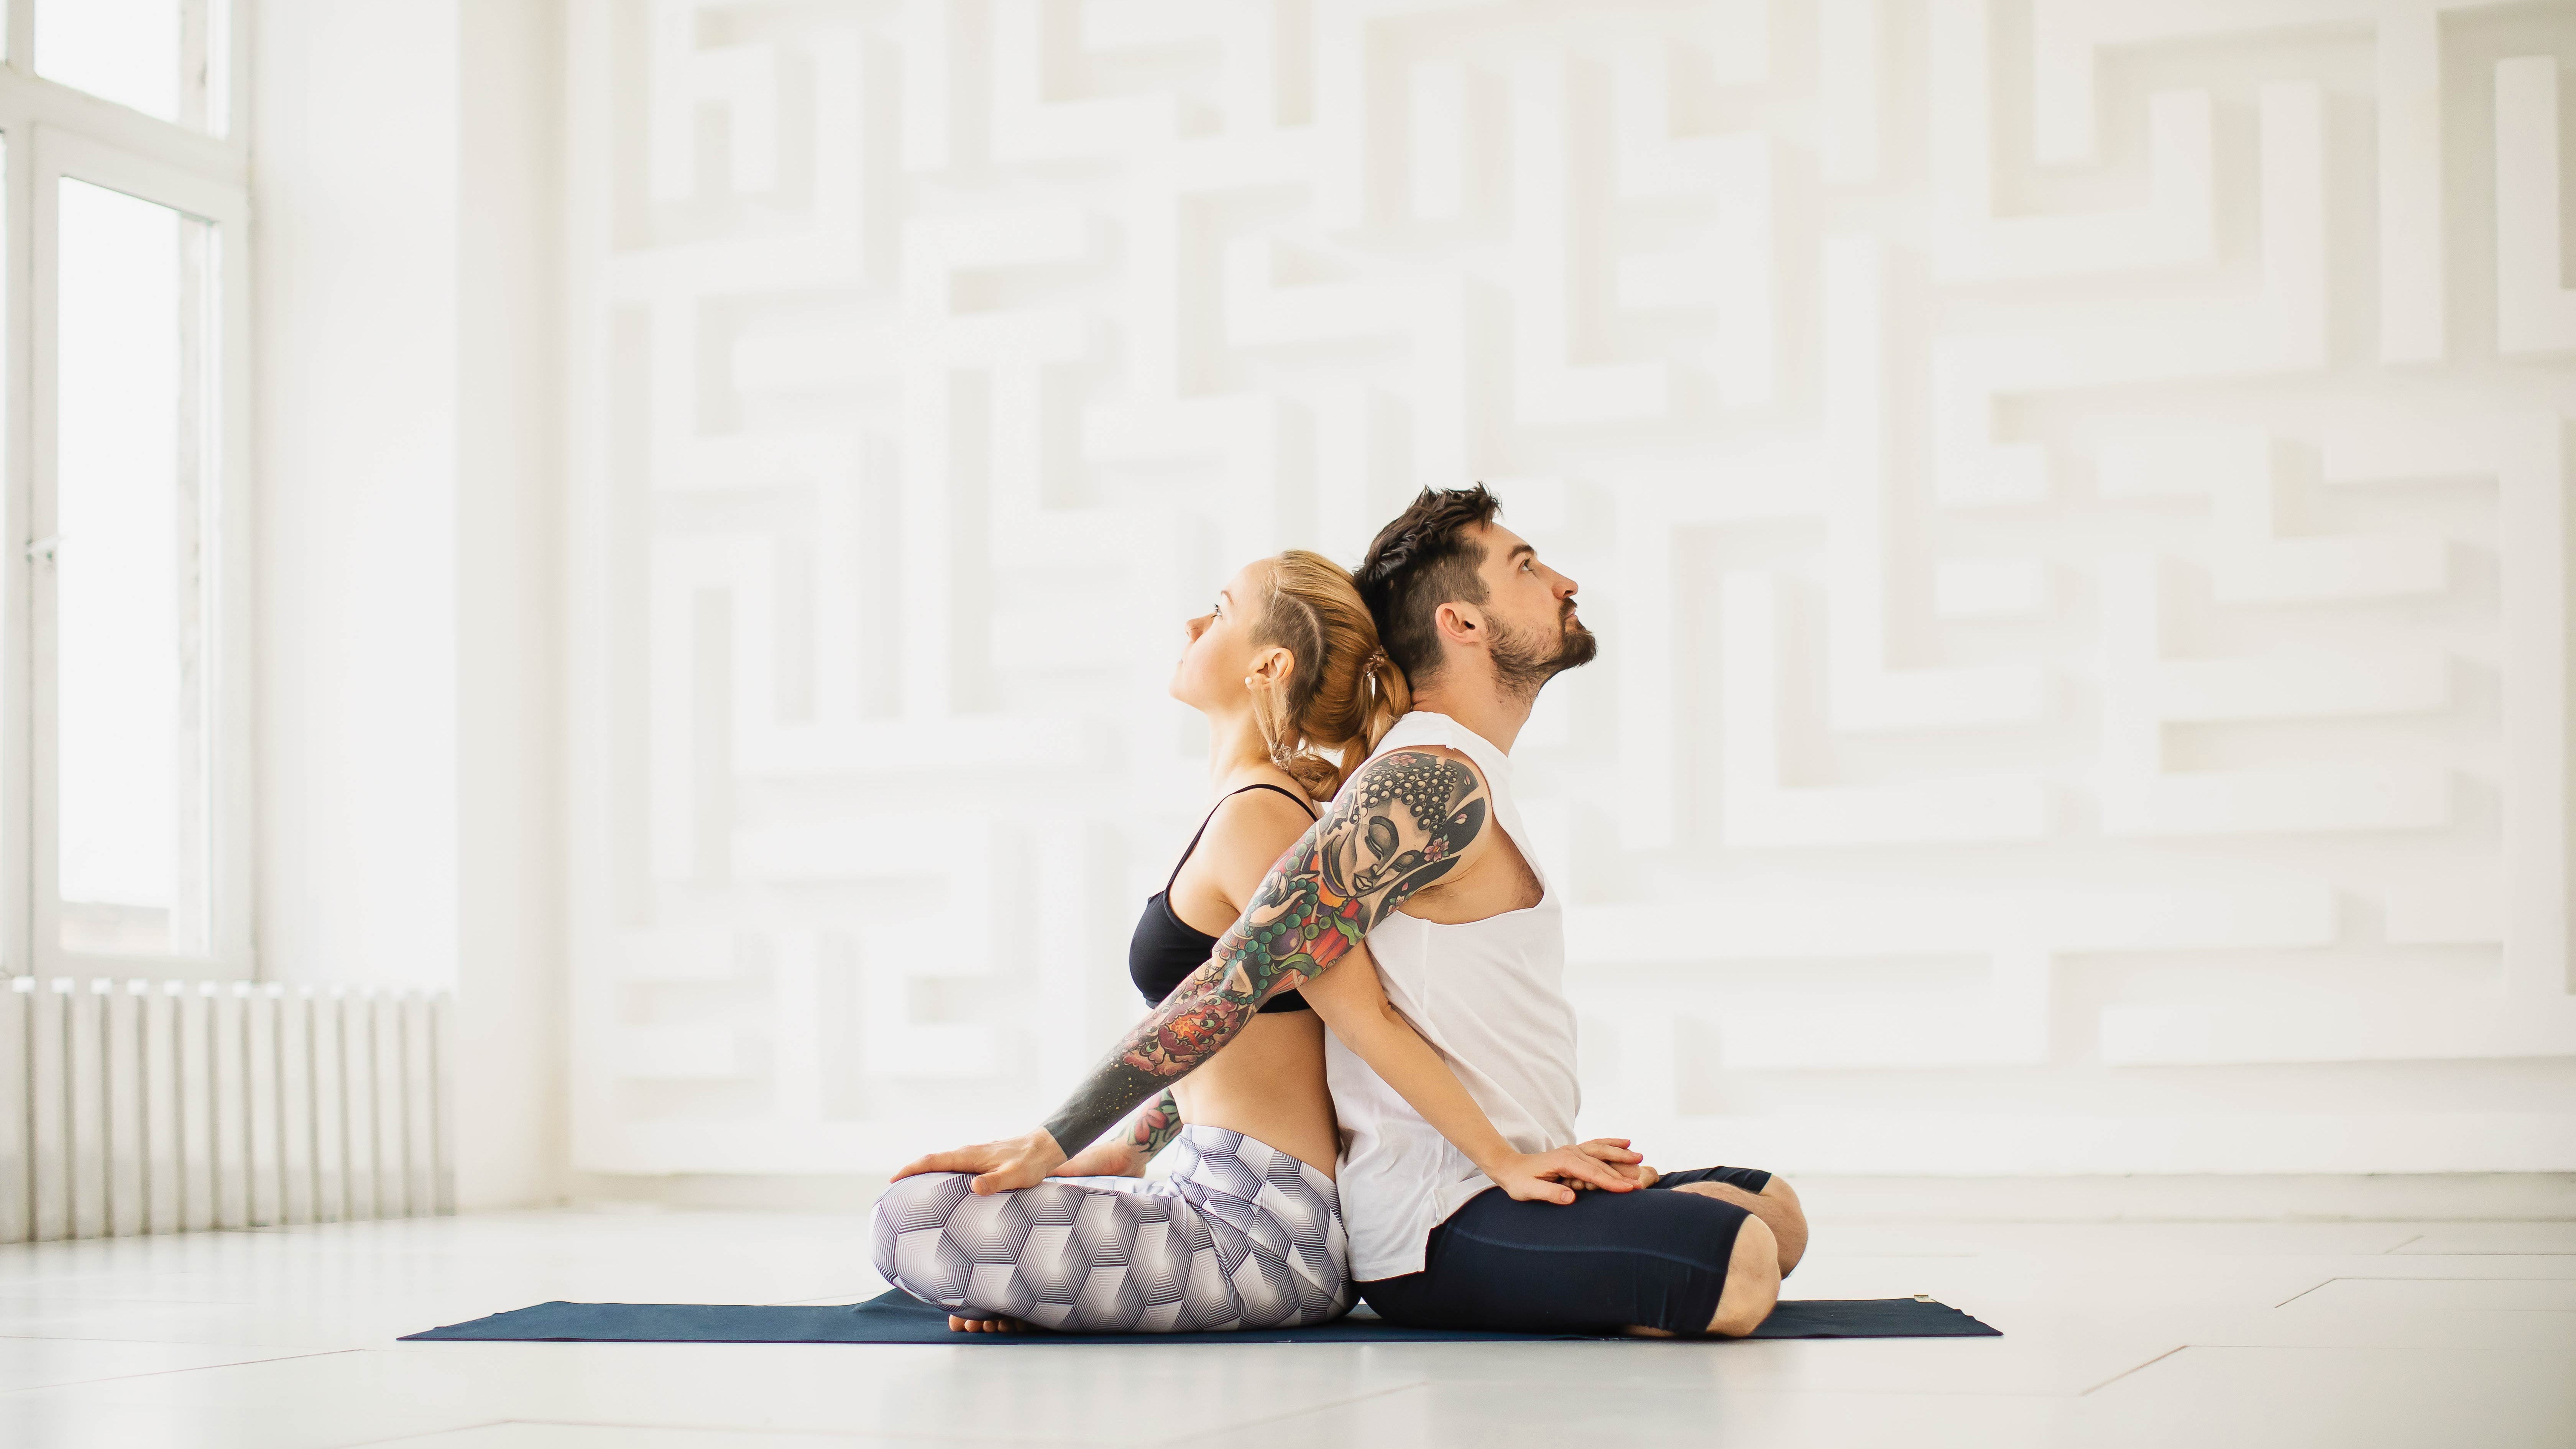 Is Partner Yoga the New Couples Therapy?